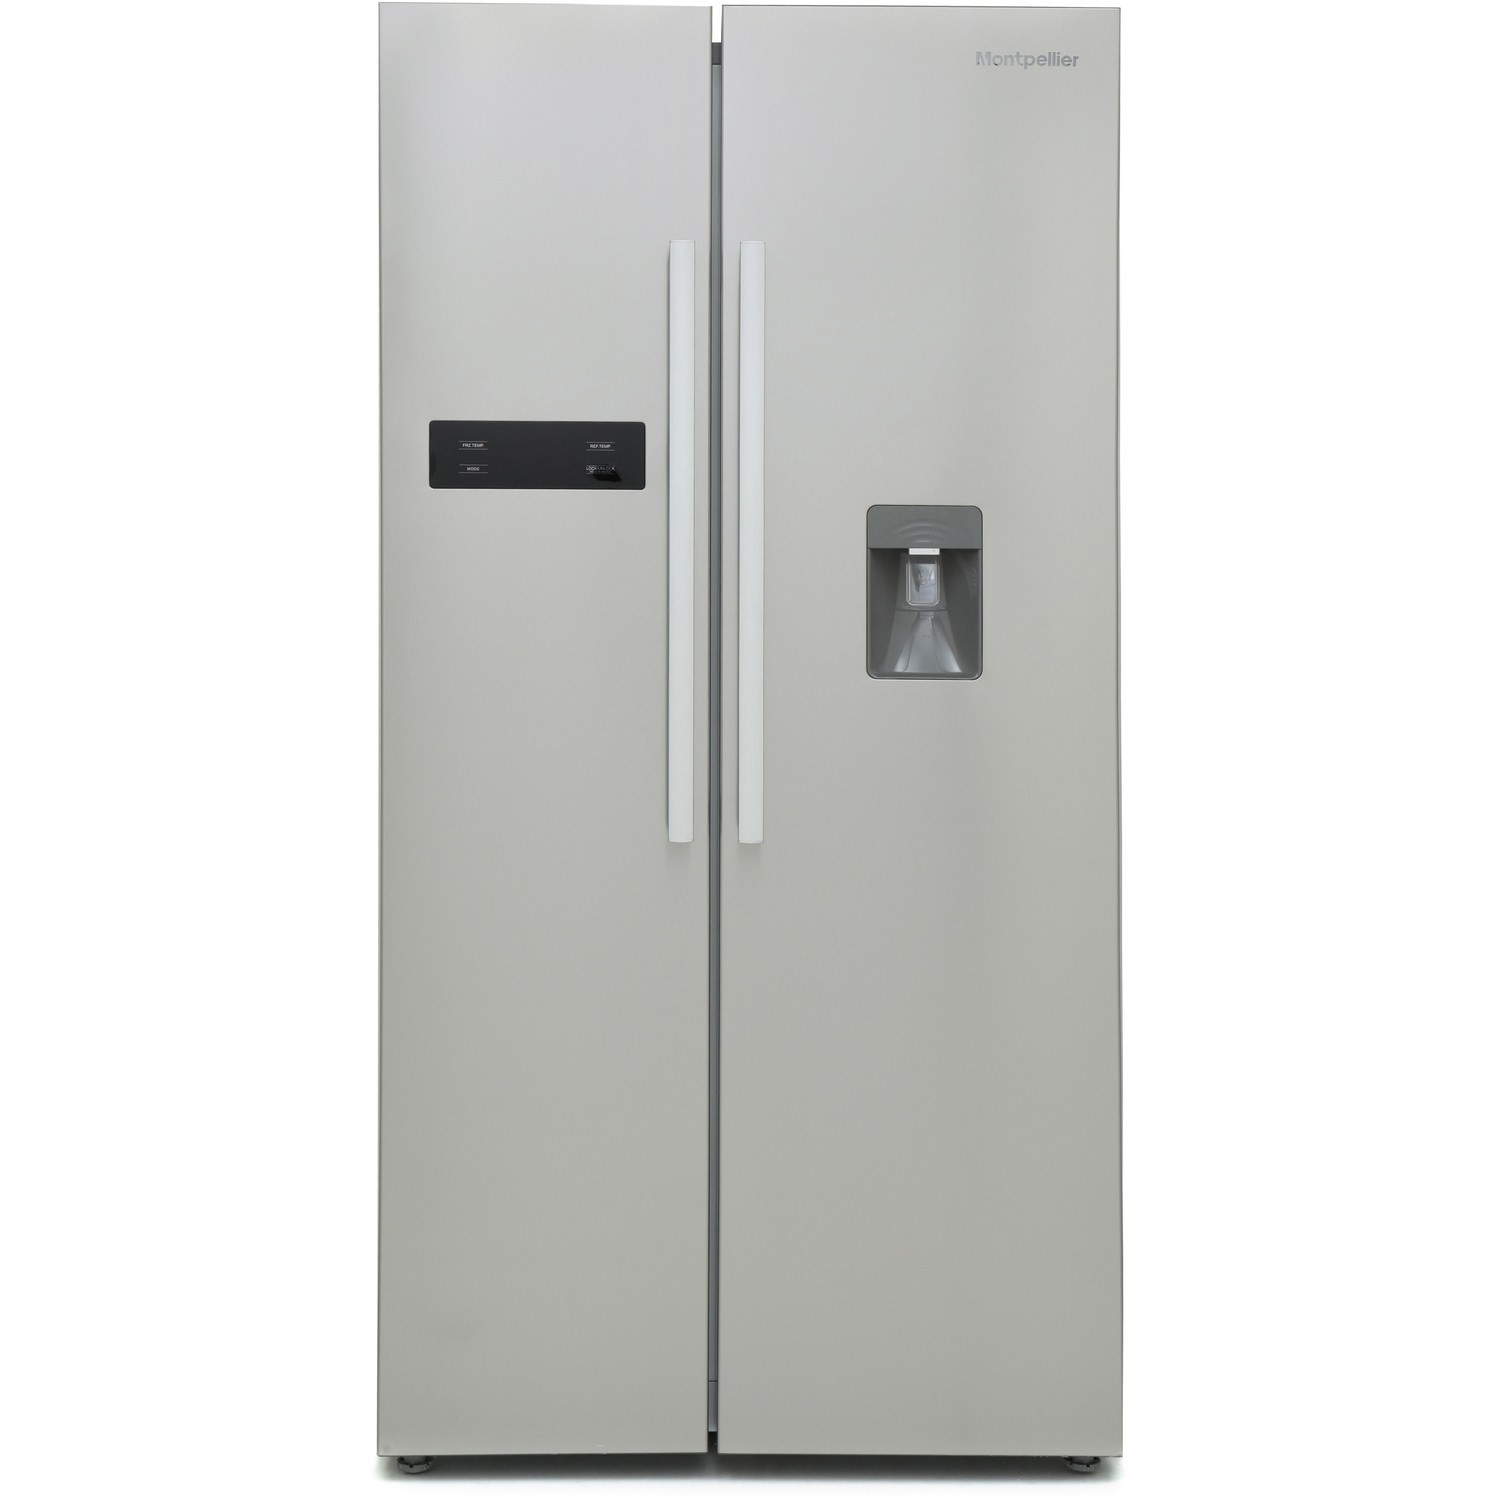 Refurbished Montpellier M520WDX 510 Litre American Style Frost Free Fridge Freezer Stainless Steel